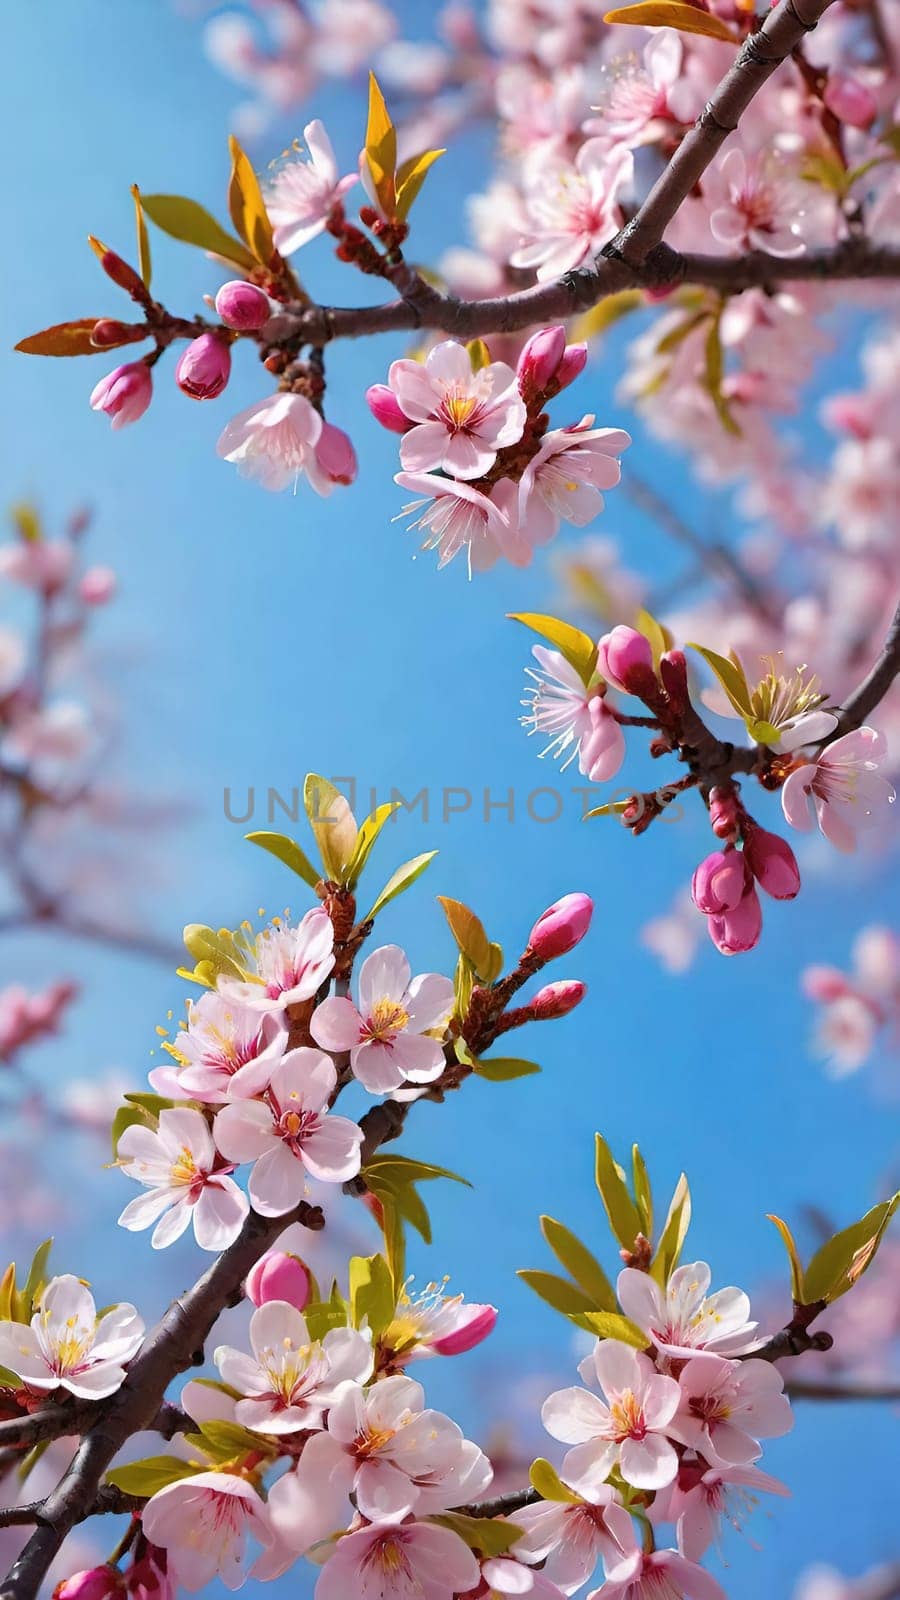 Cherry blossom in spring, pink flowers on blue sky background.cherry blossom on blue sky background, closeup of flowers. Sakura.Branch of blossoming tree with pink flowers on blue sky background.